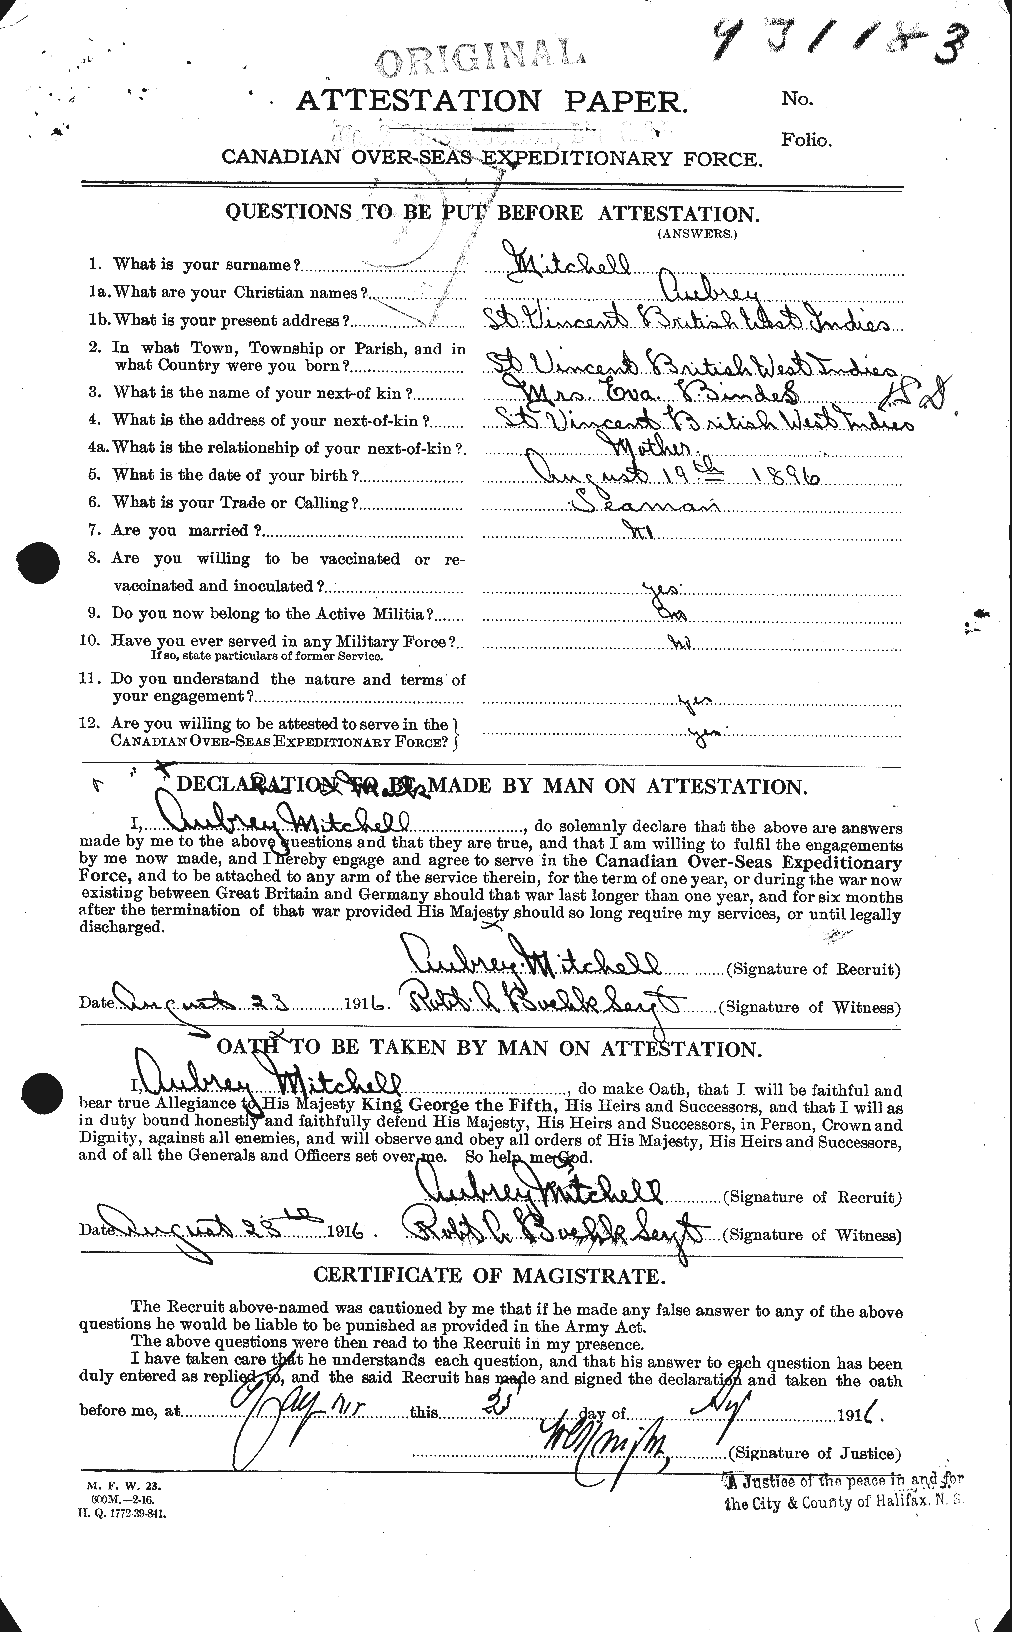 Personnel Records of the First World War - CEF 496077a